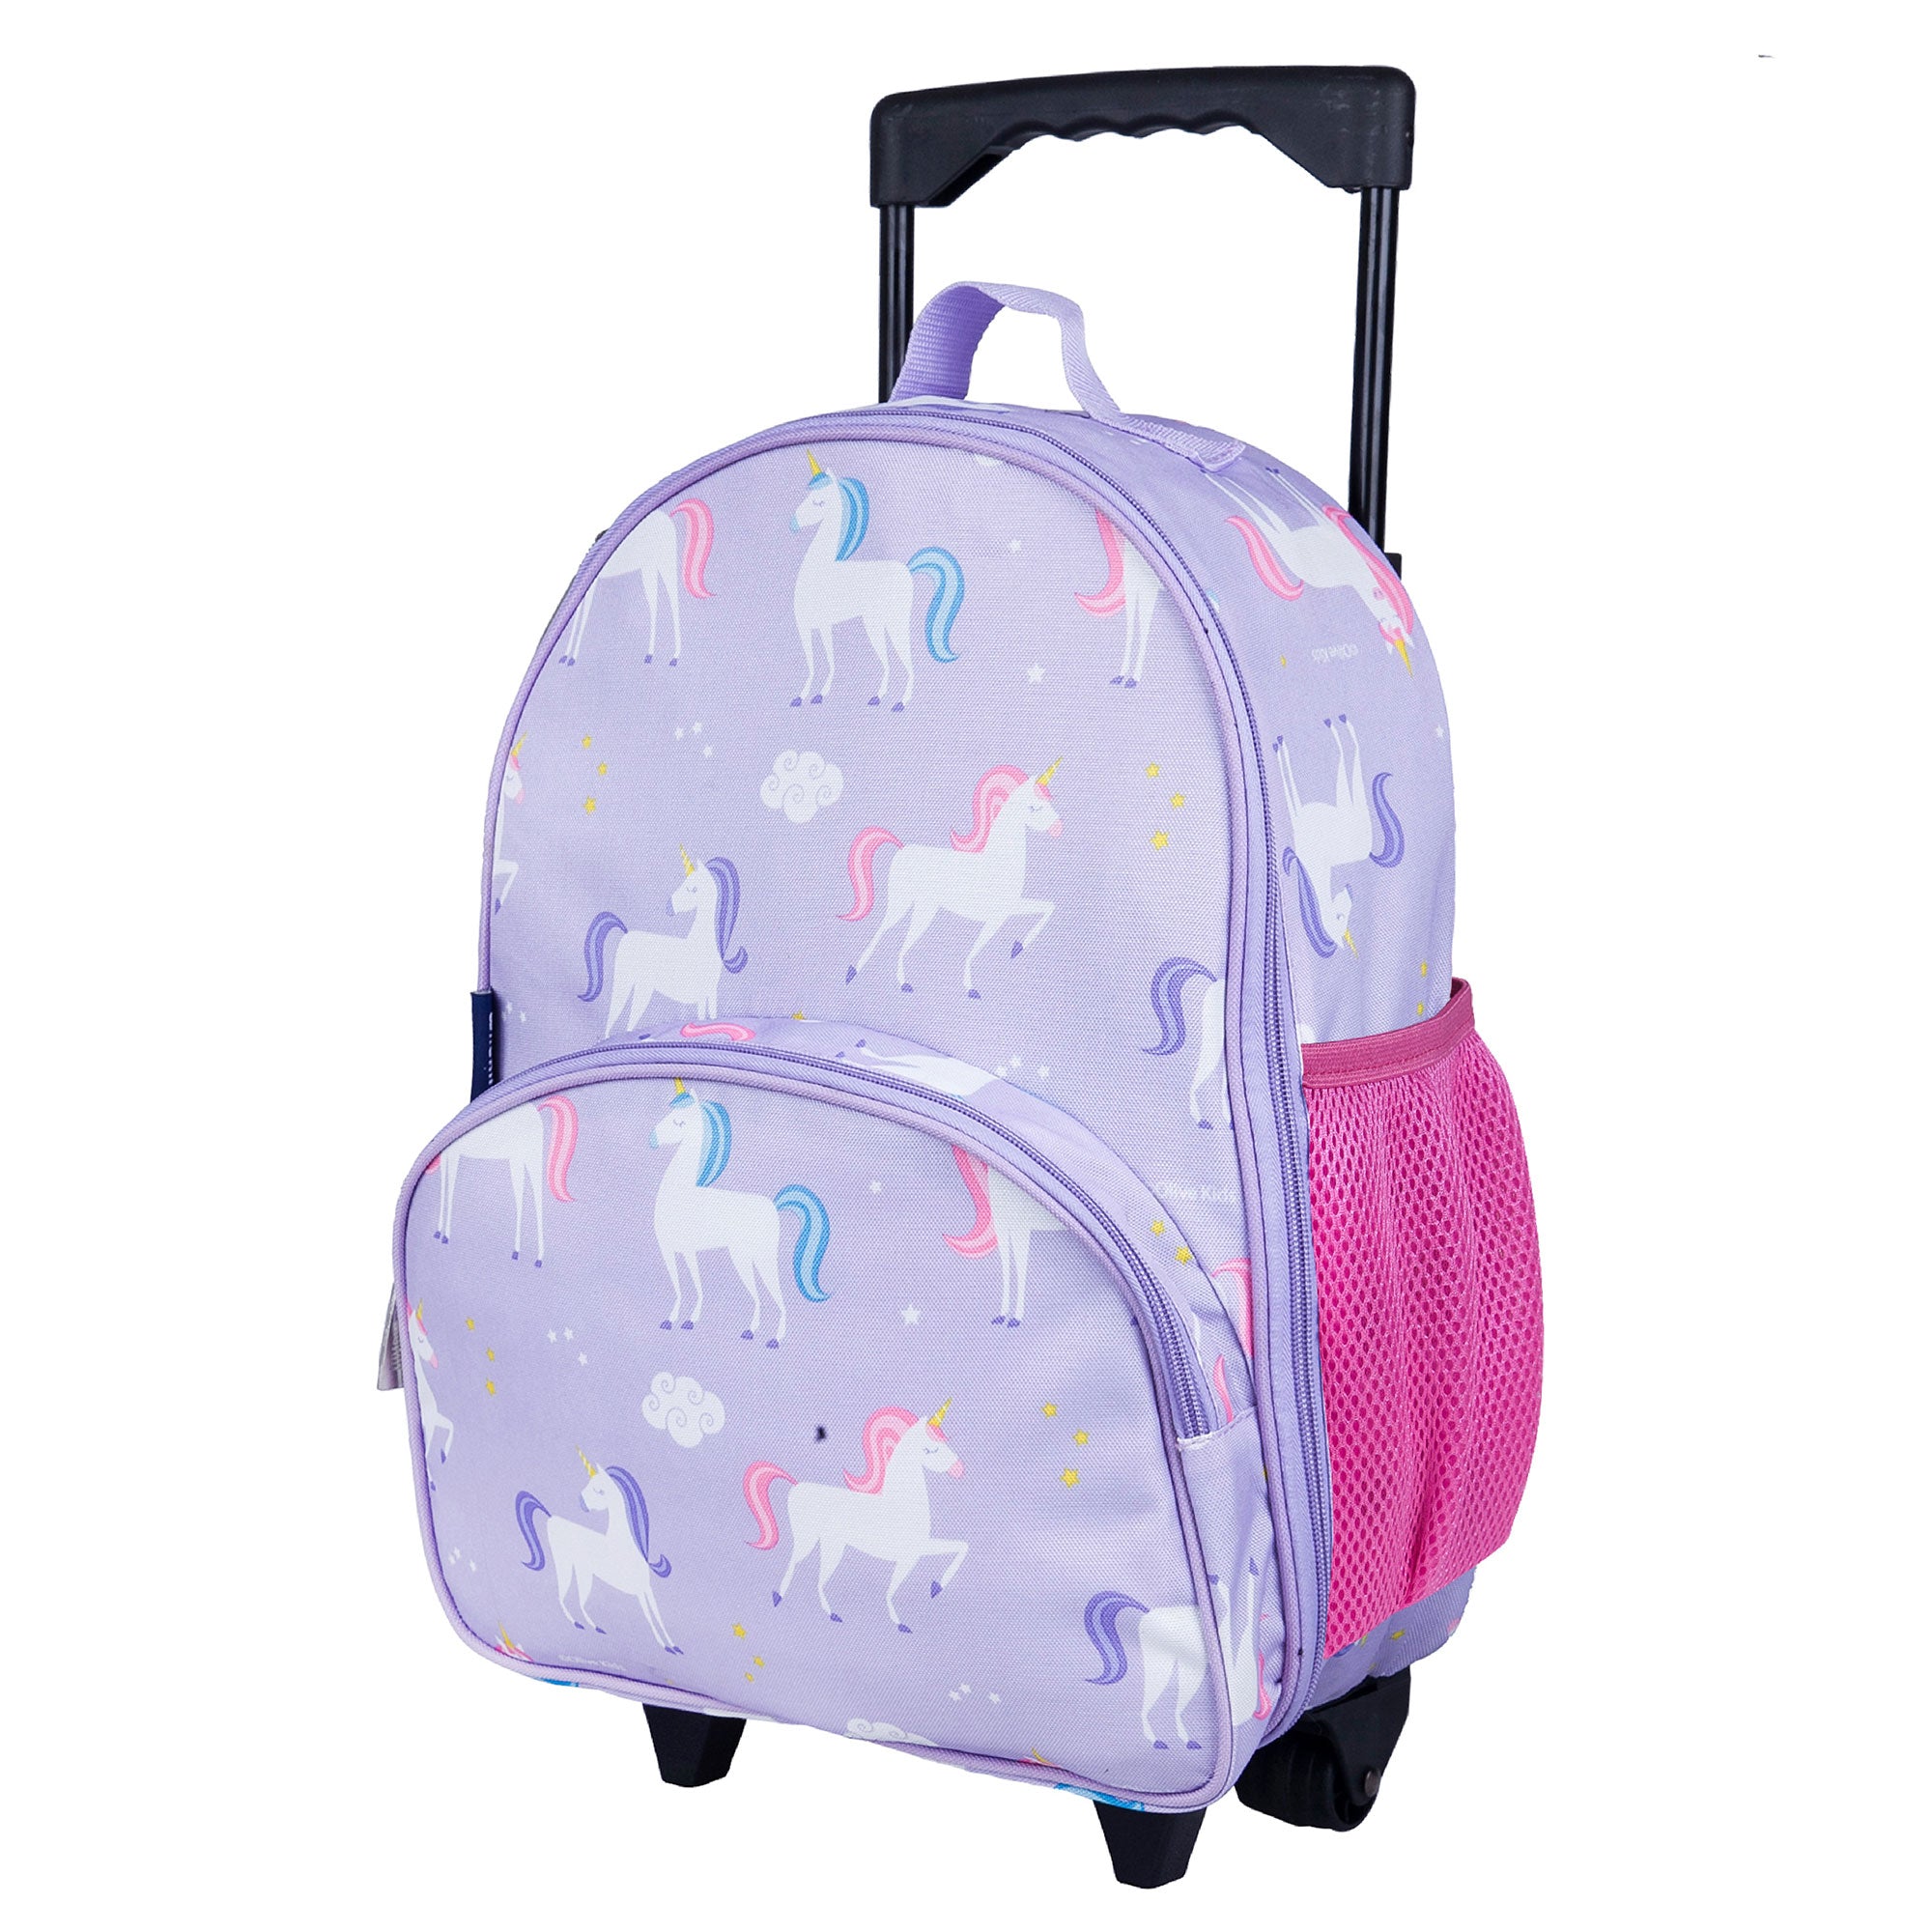 VLIVE 2-Piece Kids Luggage 18 in. Set Astronaut Pattern Blue  TH17T0782GM-T02 - The Home Depot